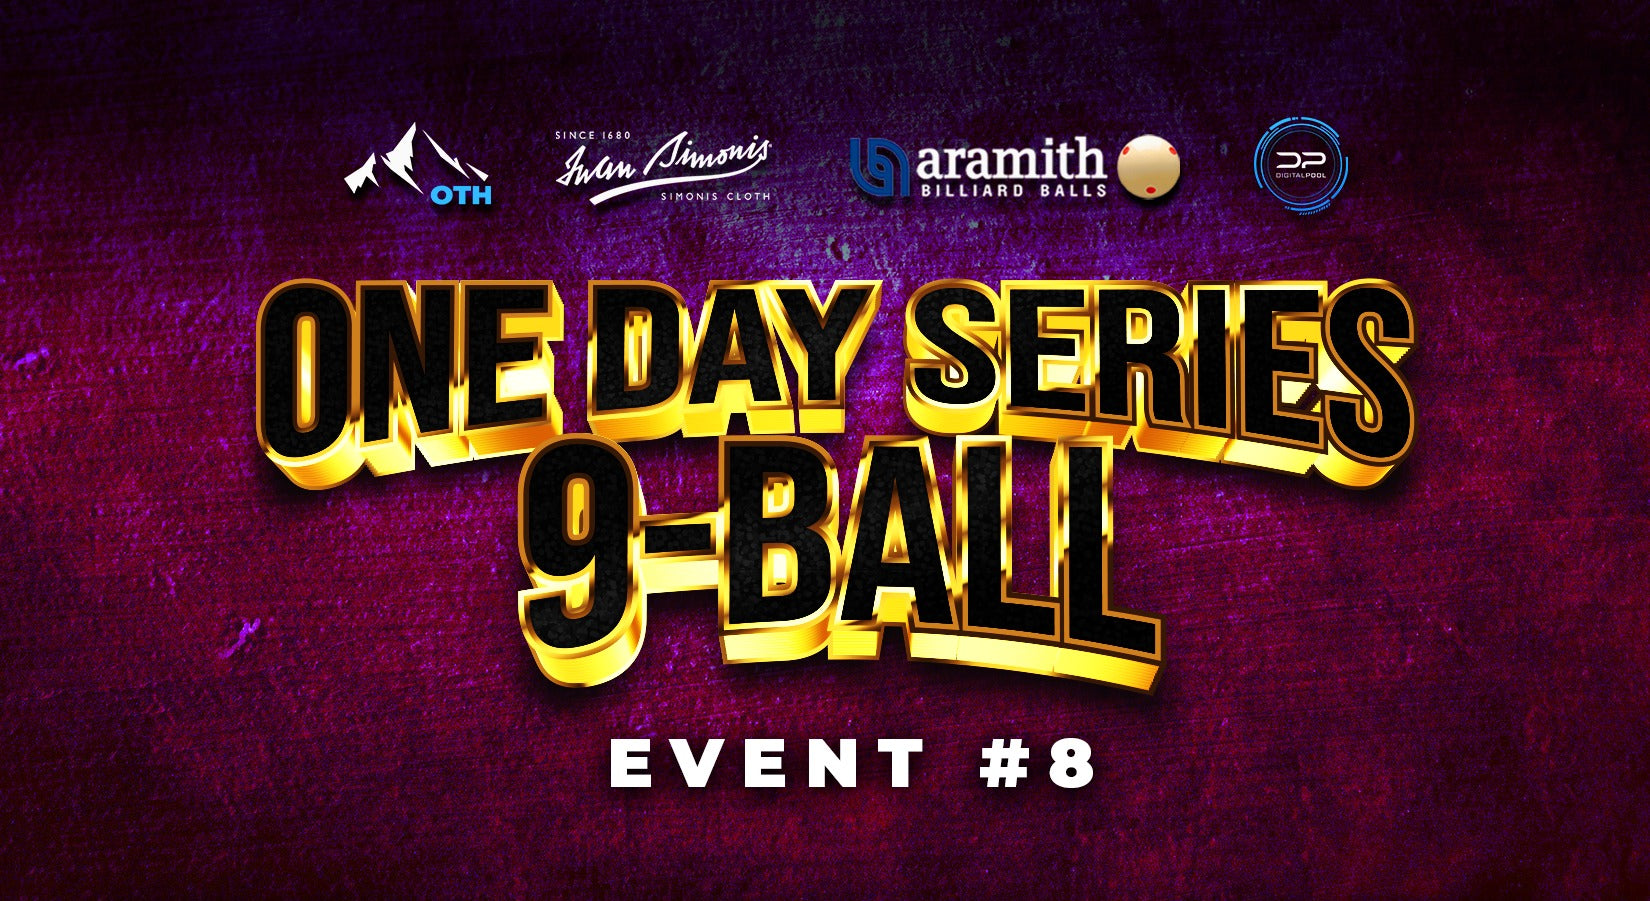 Oct 26 - One Day Open 9-Ball Series Event #8